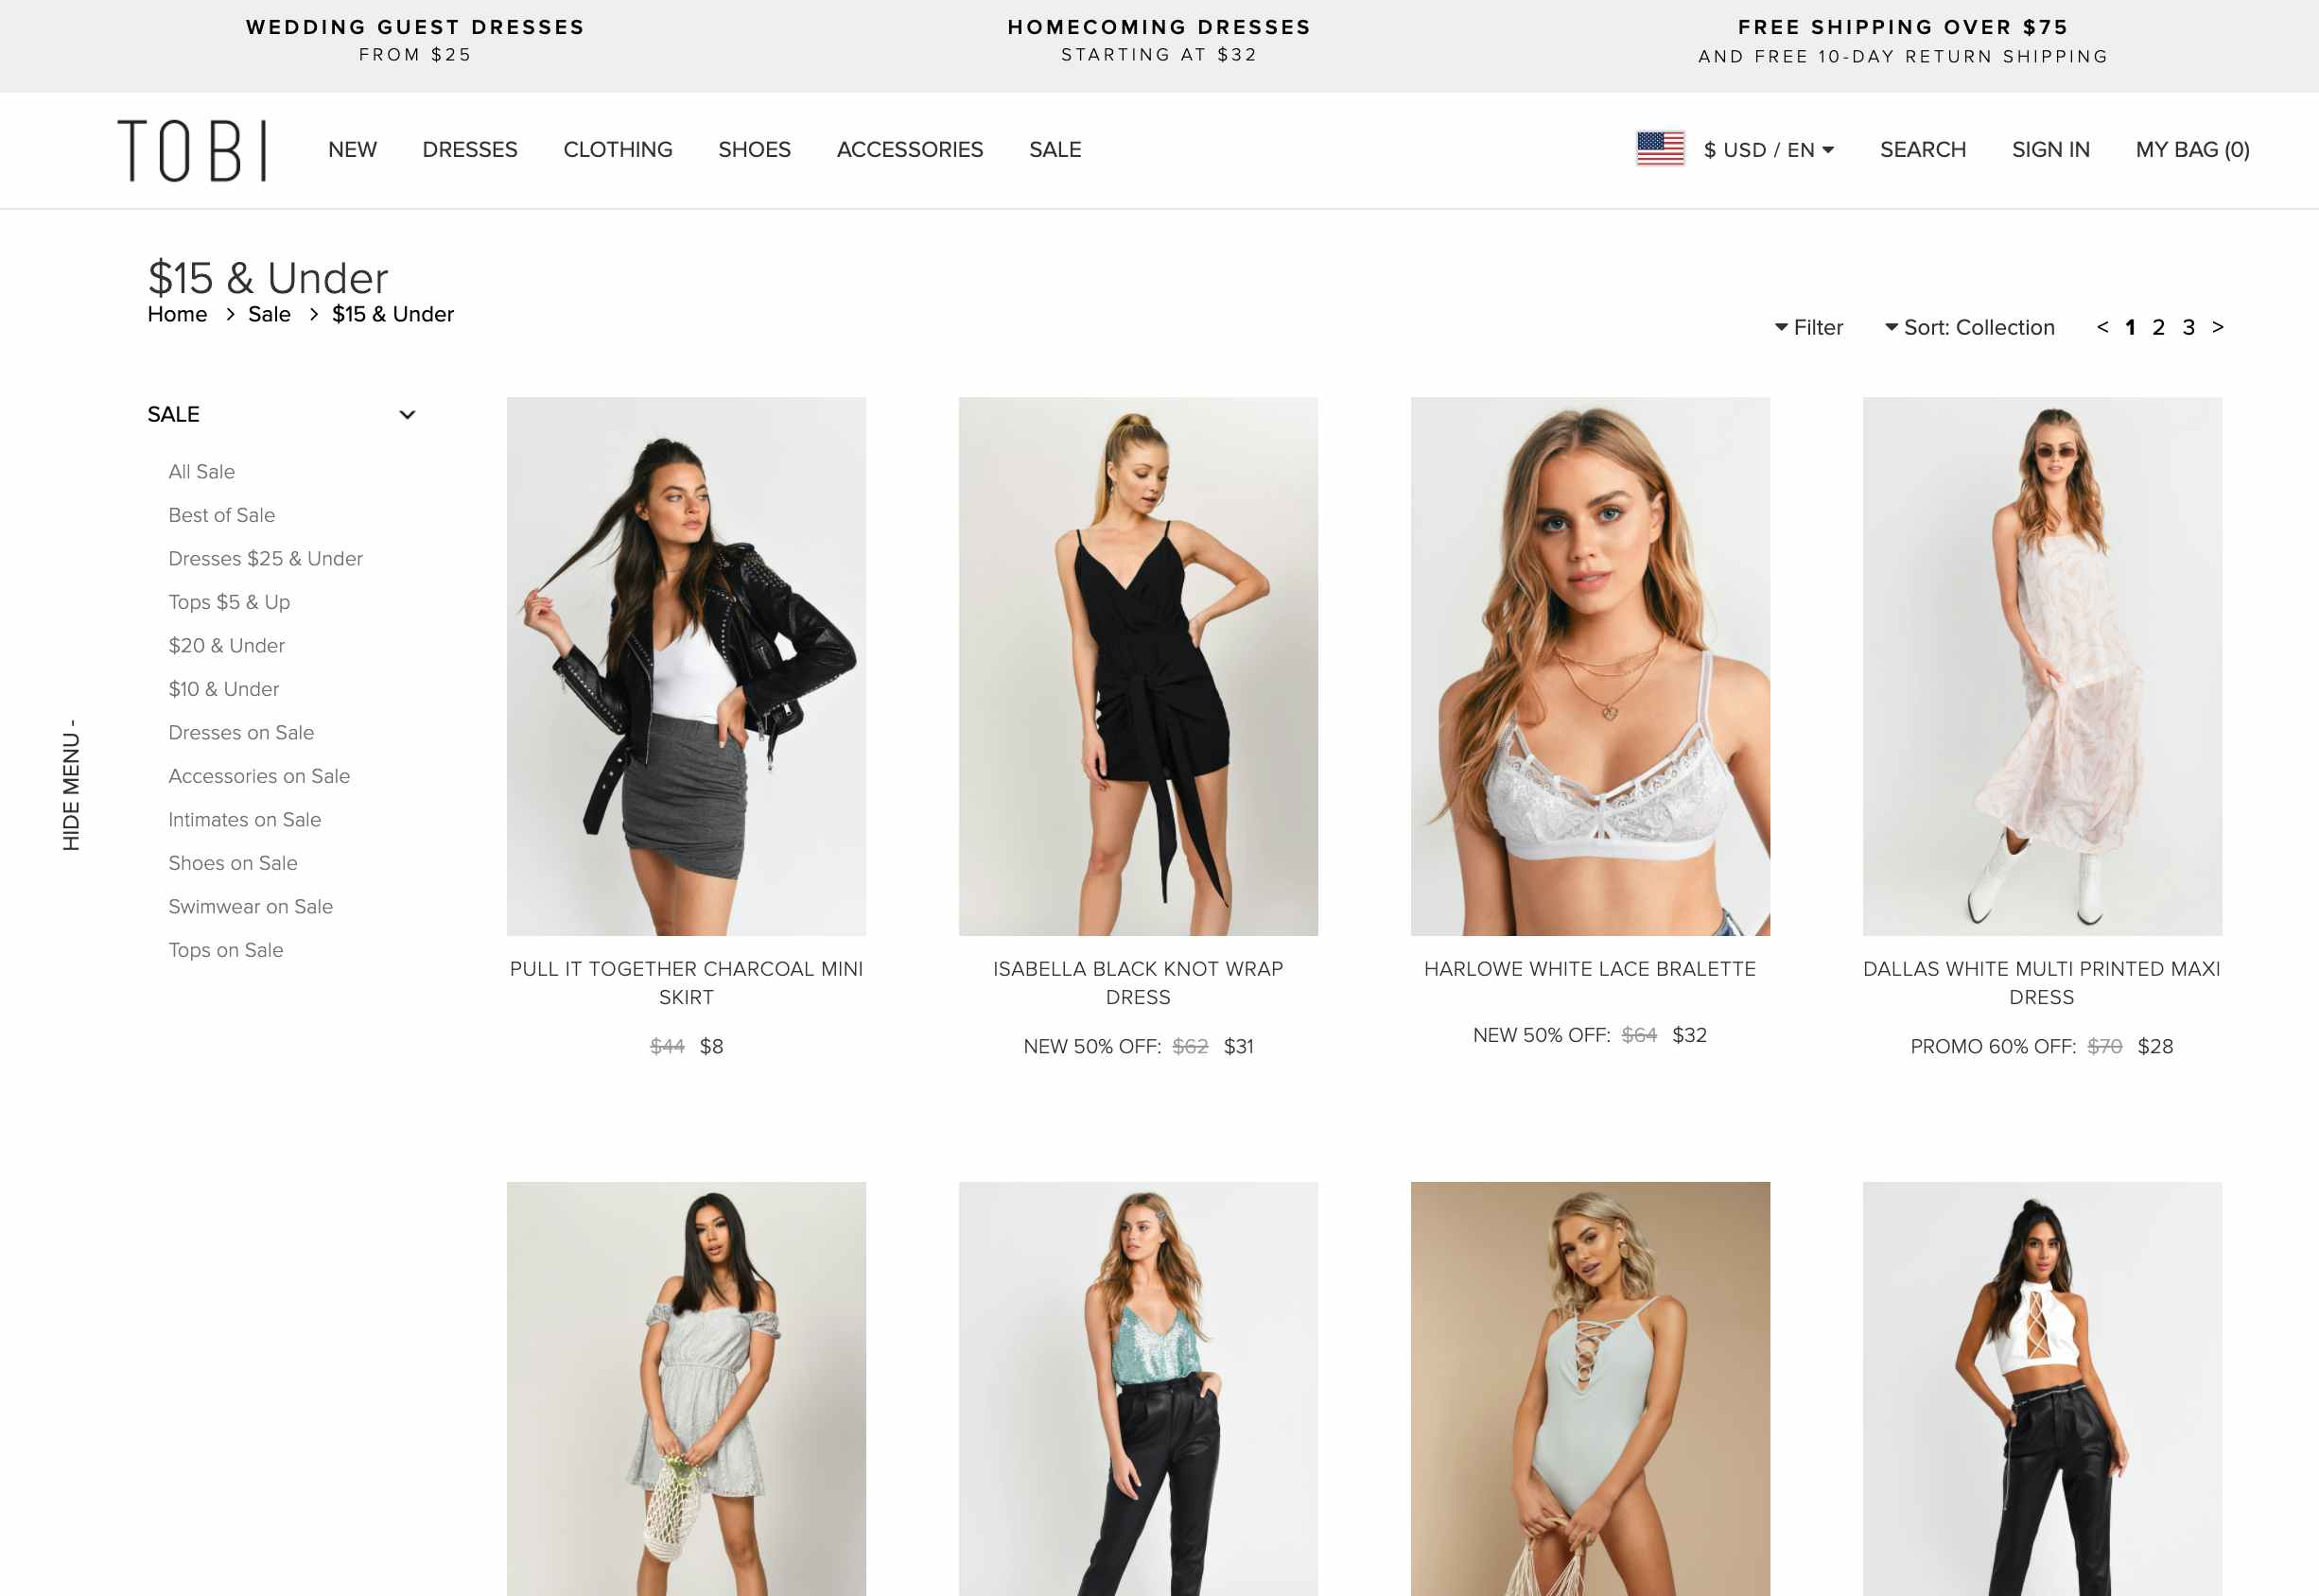 35 Best Cheap Online Clothing Stores That Don't Skimp on Quality